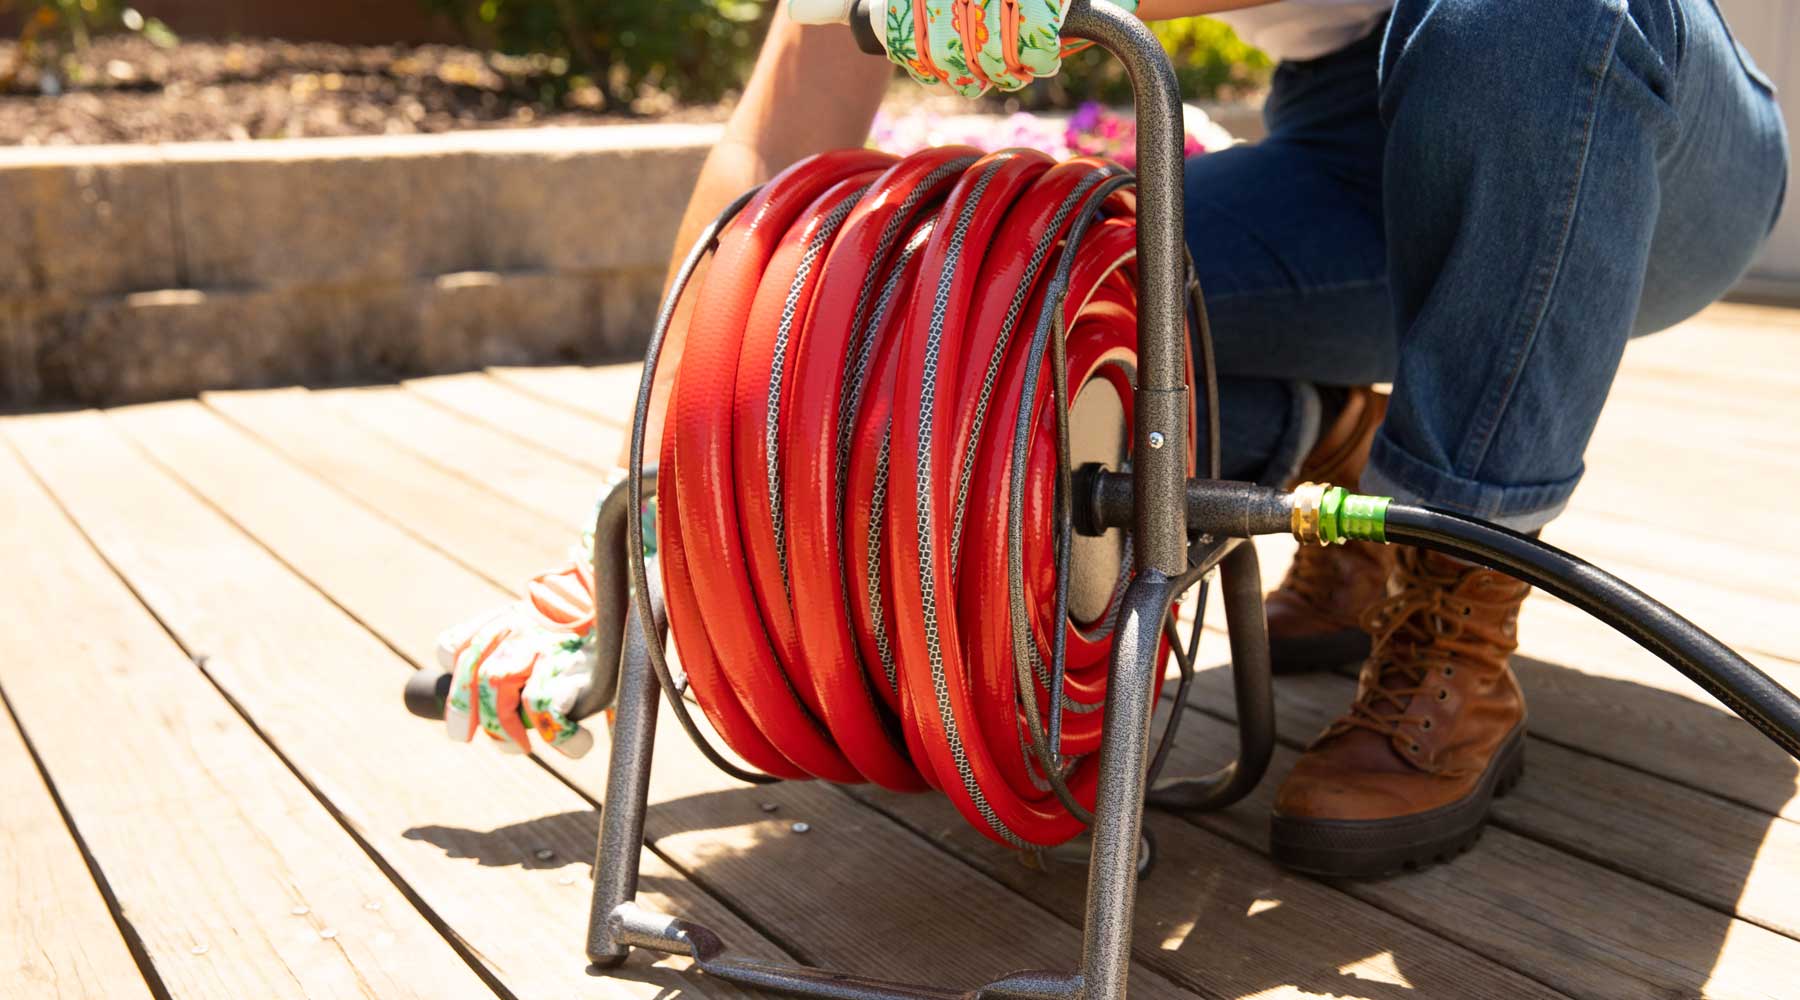 Garden hose types for watering